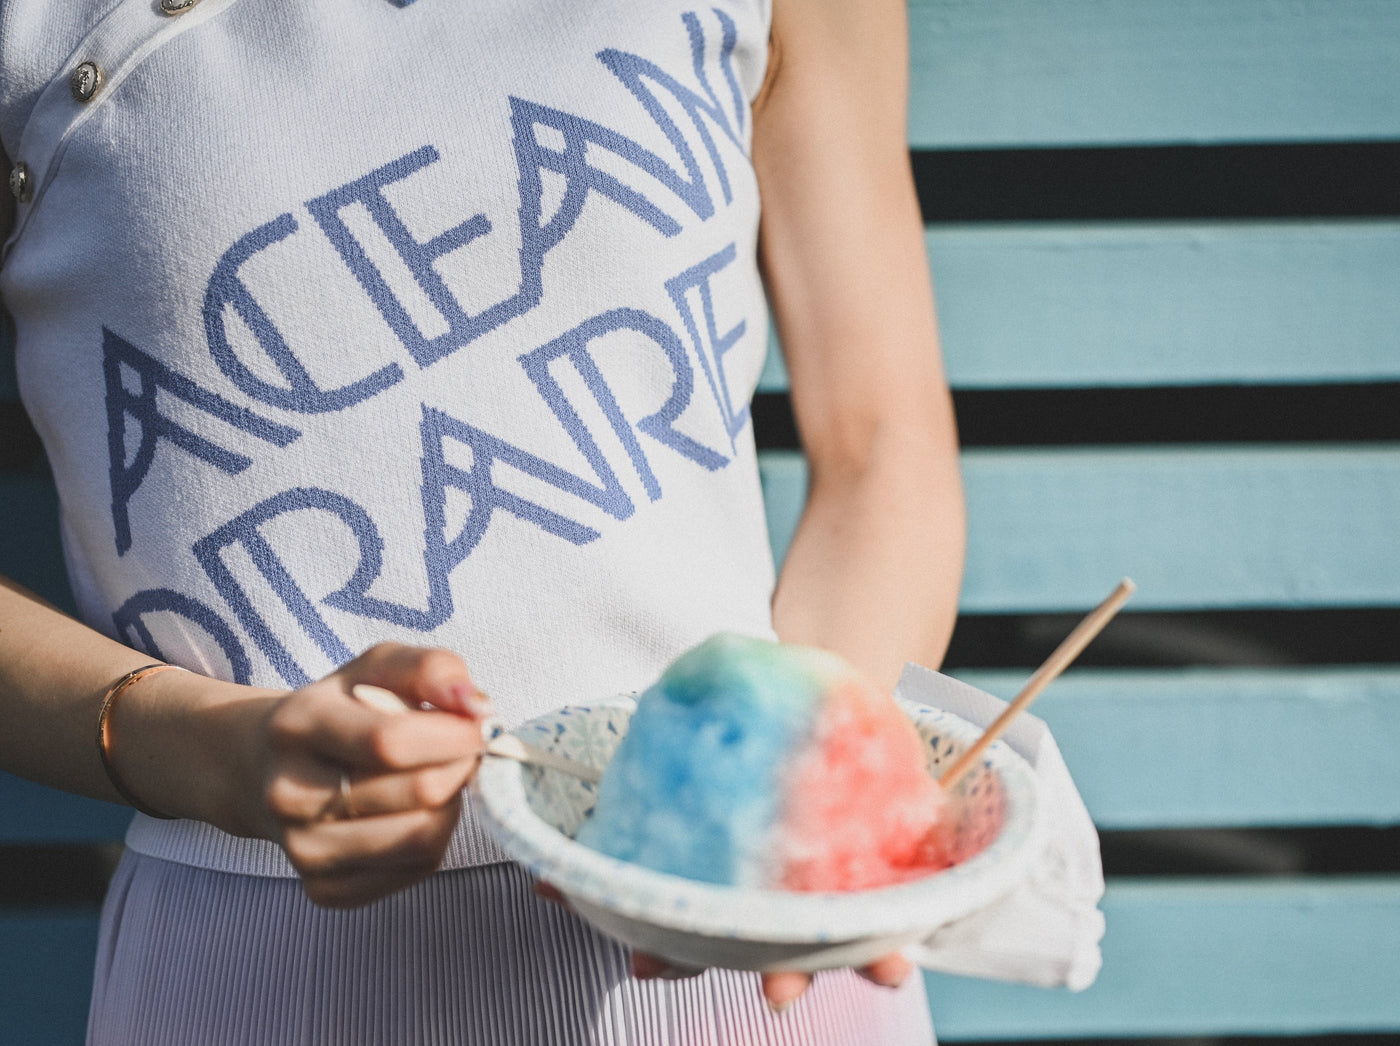 SHAVE ICE ASYMMETRY KNIT